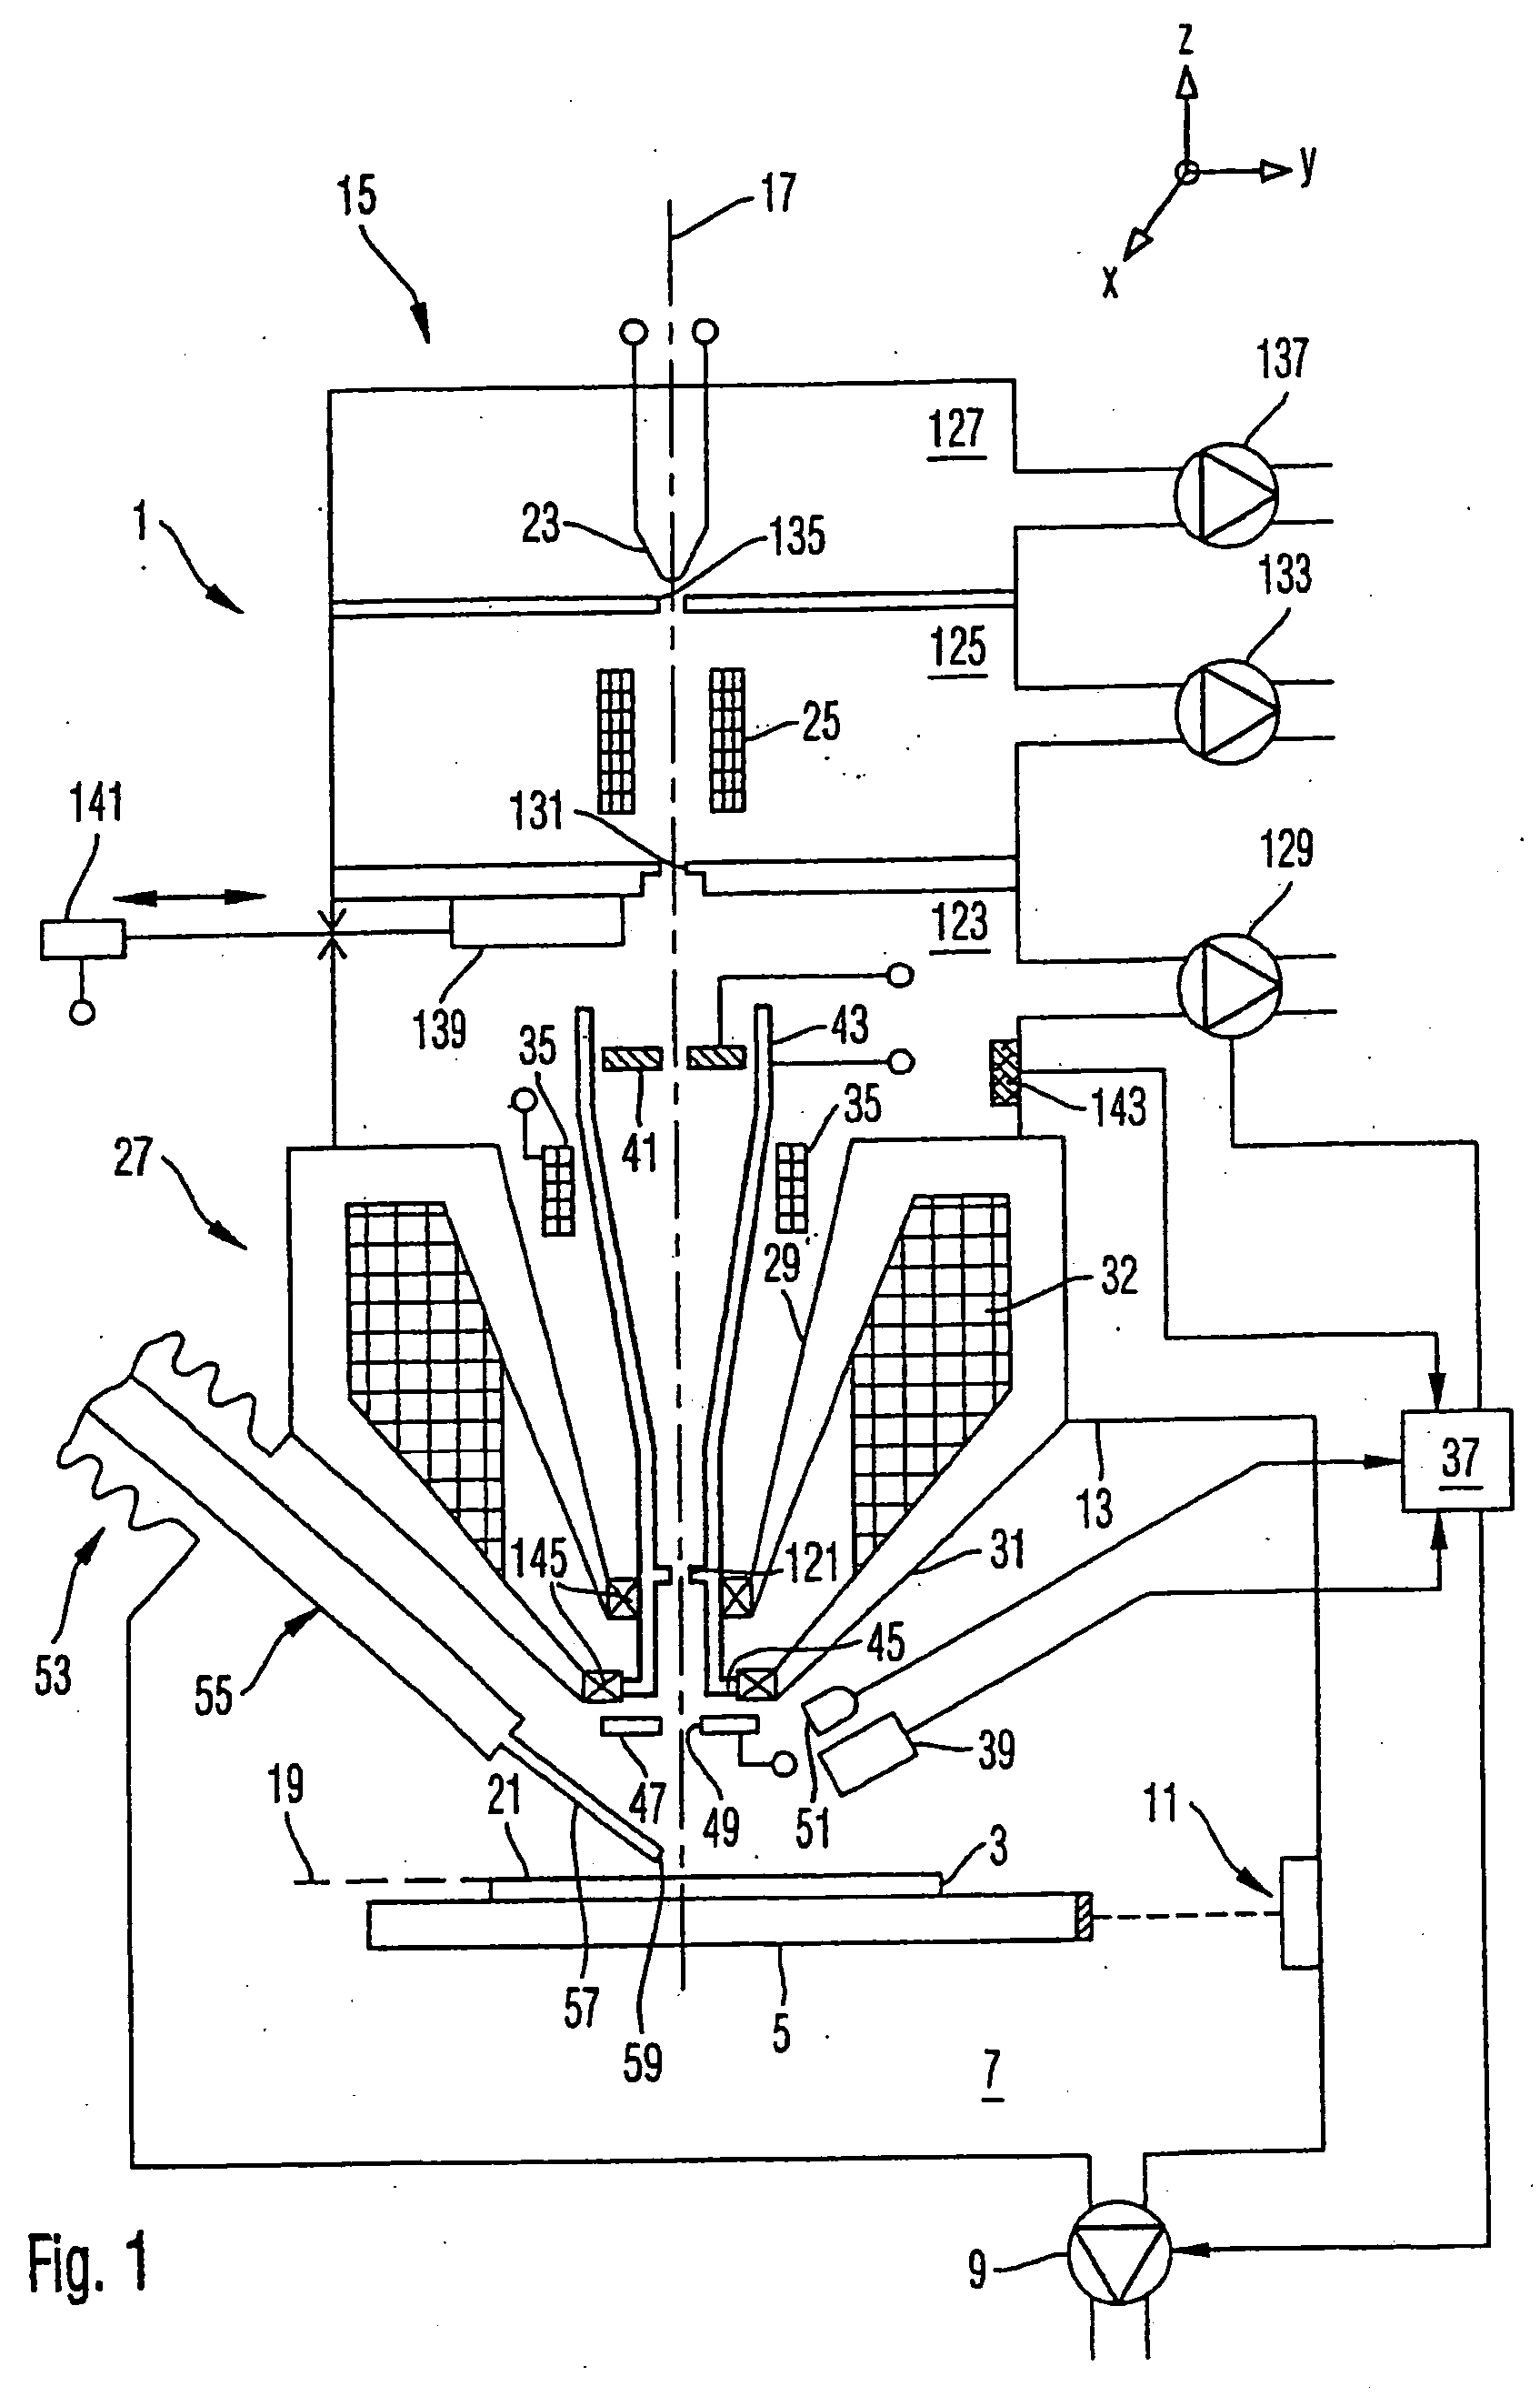 Material processing system and method